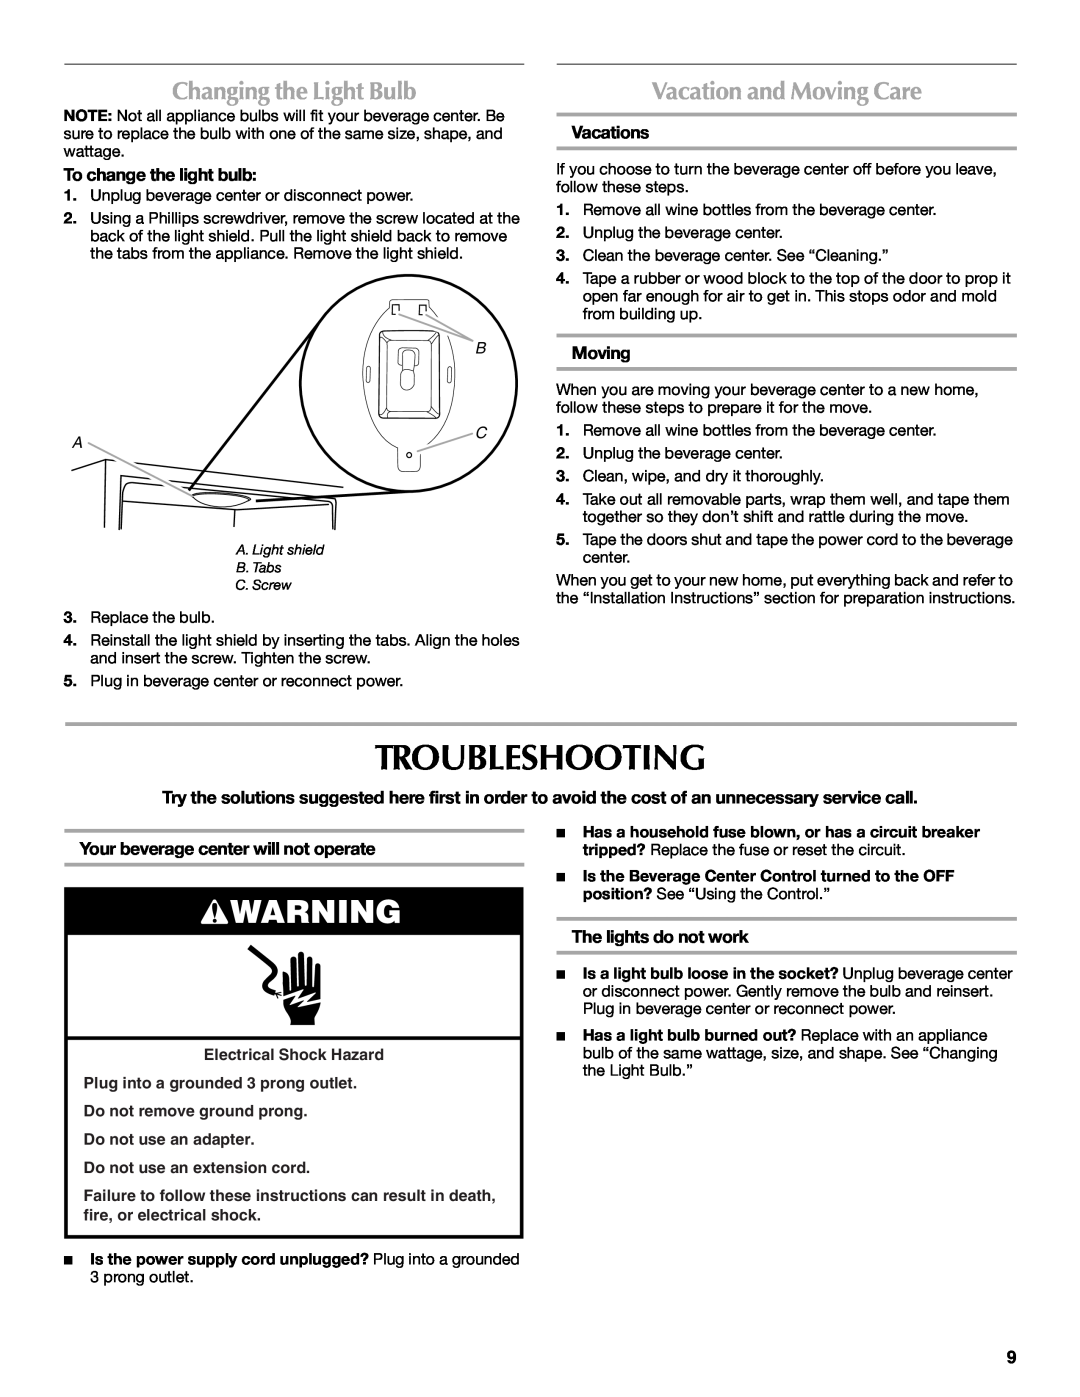 Maytag W10285880A - 8336411962010 manual Troubleshooting, Changing the Light Bulb, Vacation and Moving Care, Vacations 